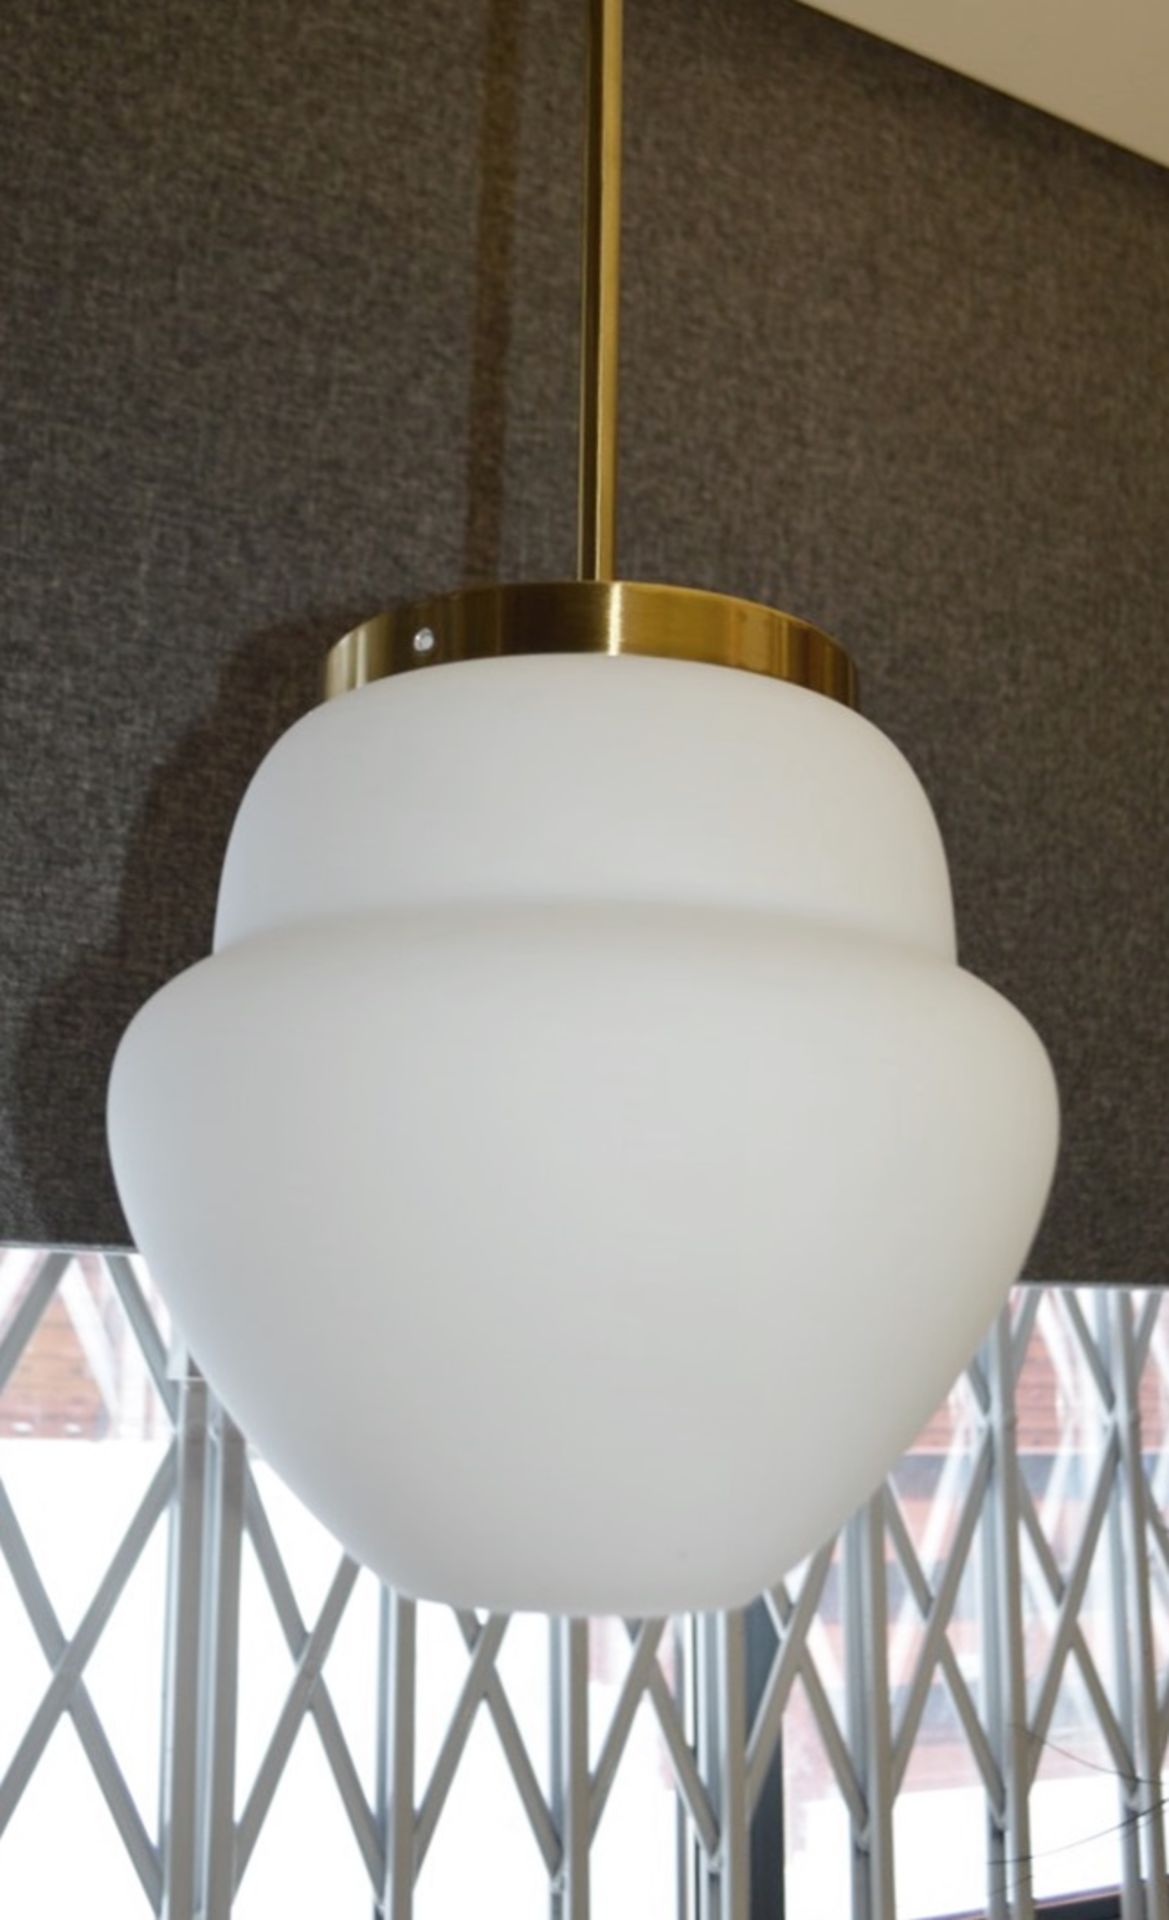 1 x CHELSOM Ceiling Light In A Polished Brass Finish With An Opal Glass Shade - Unused Boxed Stock - - Image 7 of 7